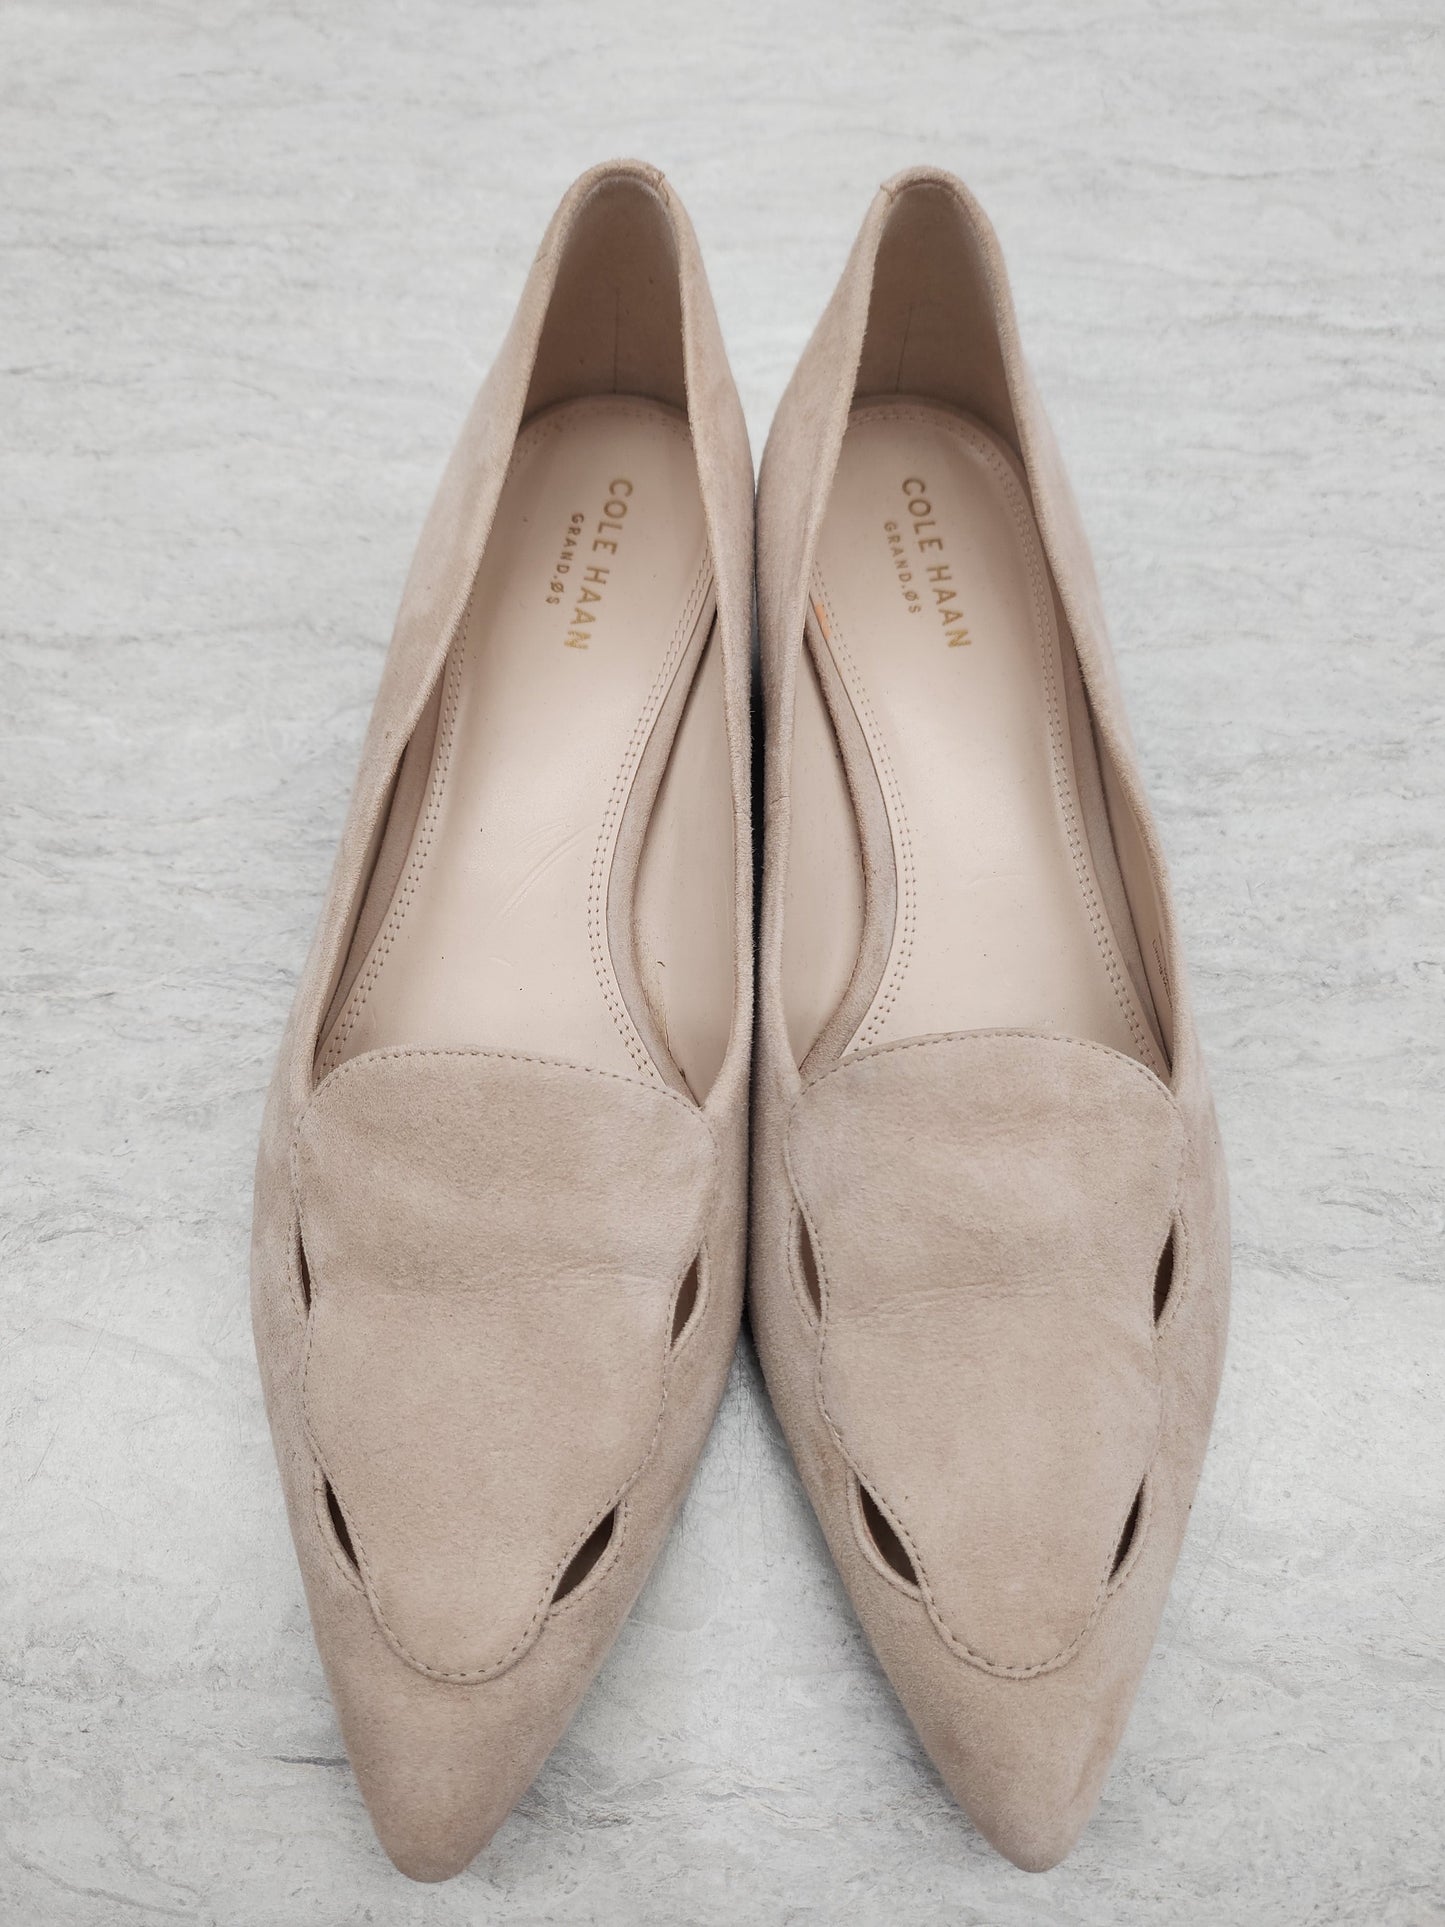 Tan Shoes Flats Cole-haan, Size 8.5